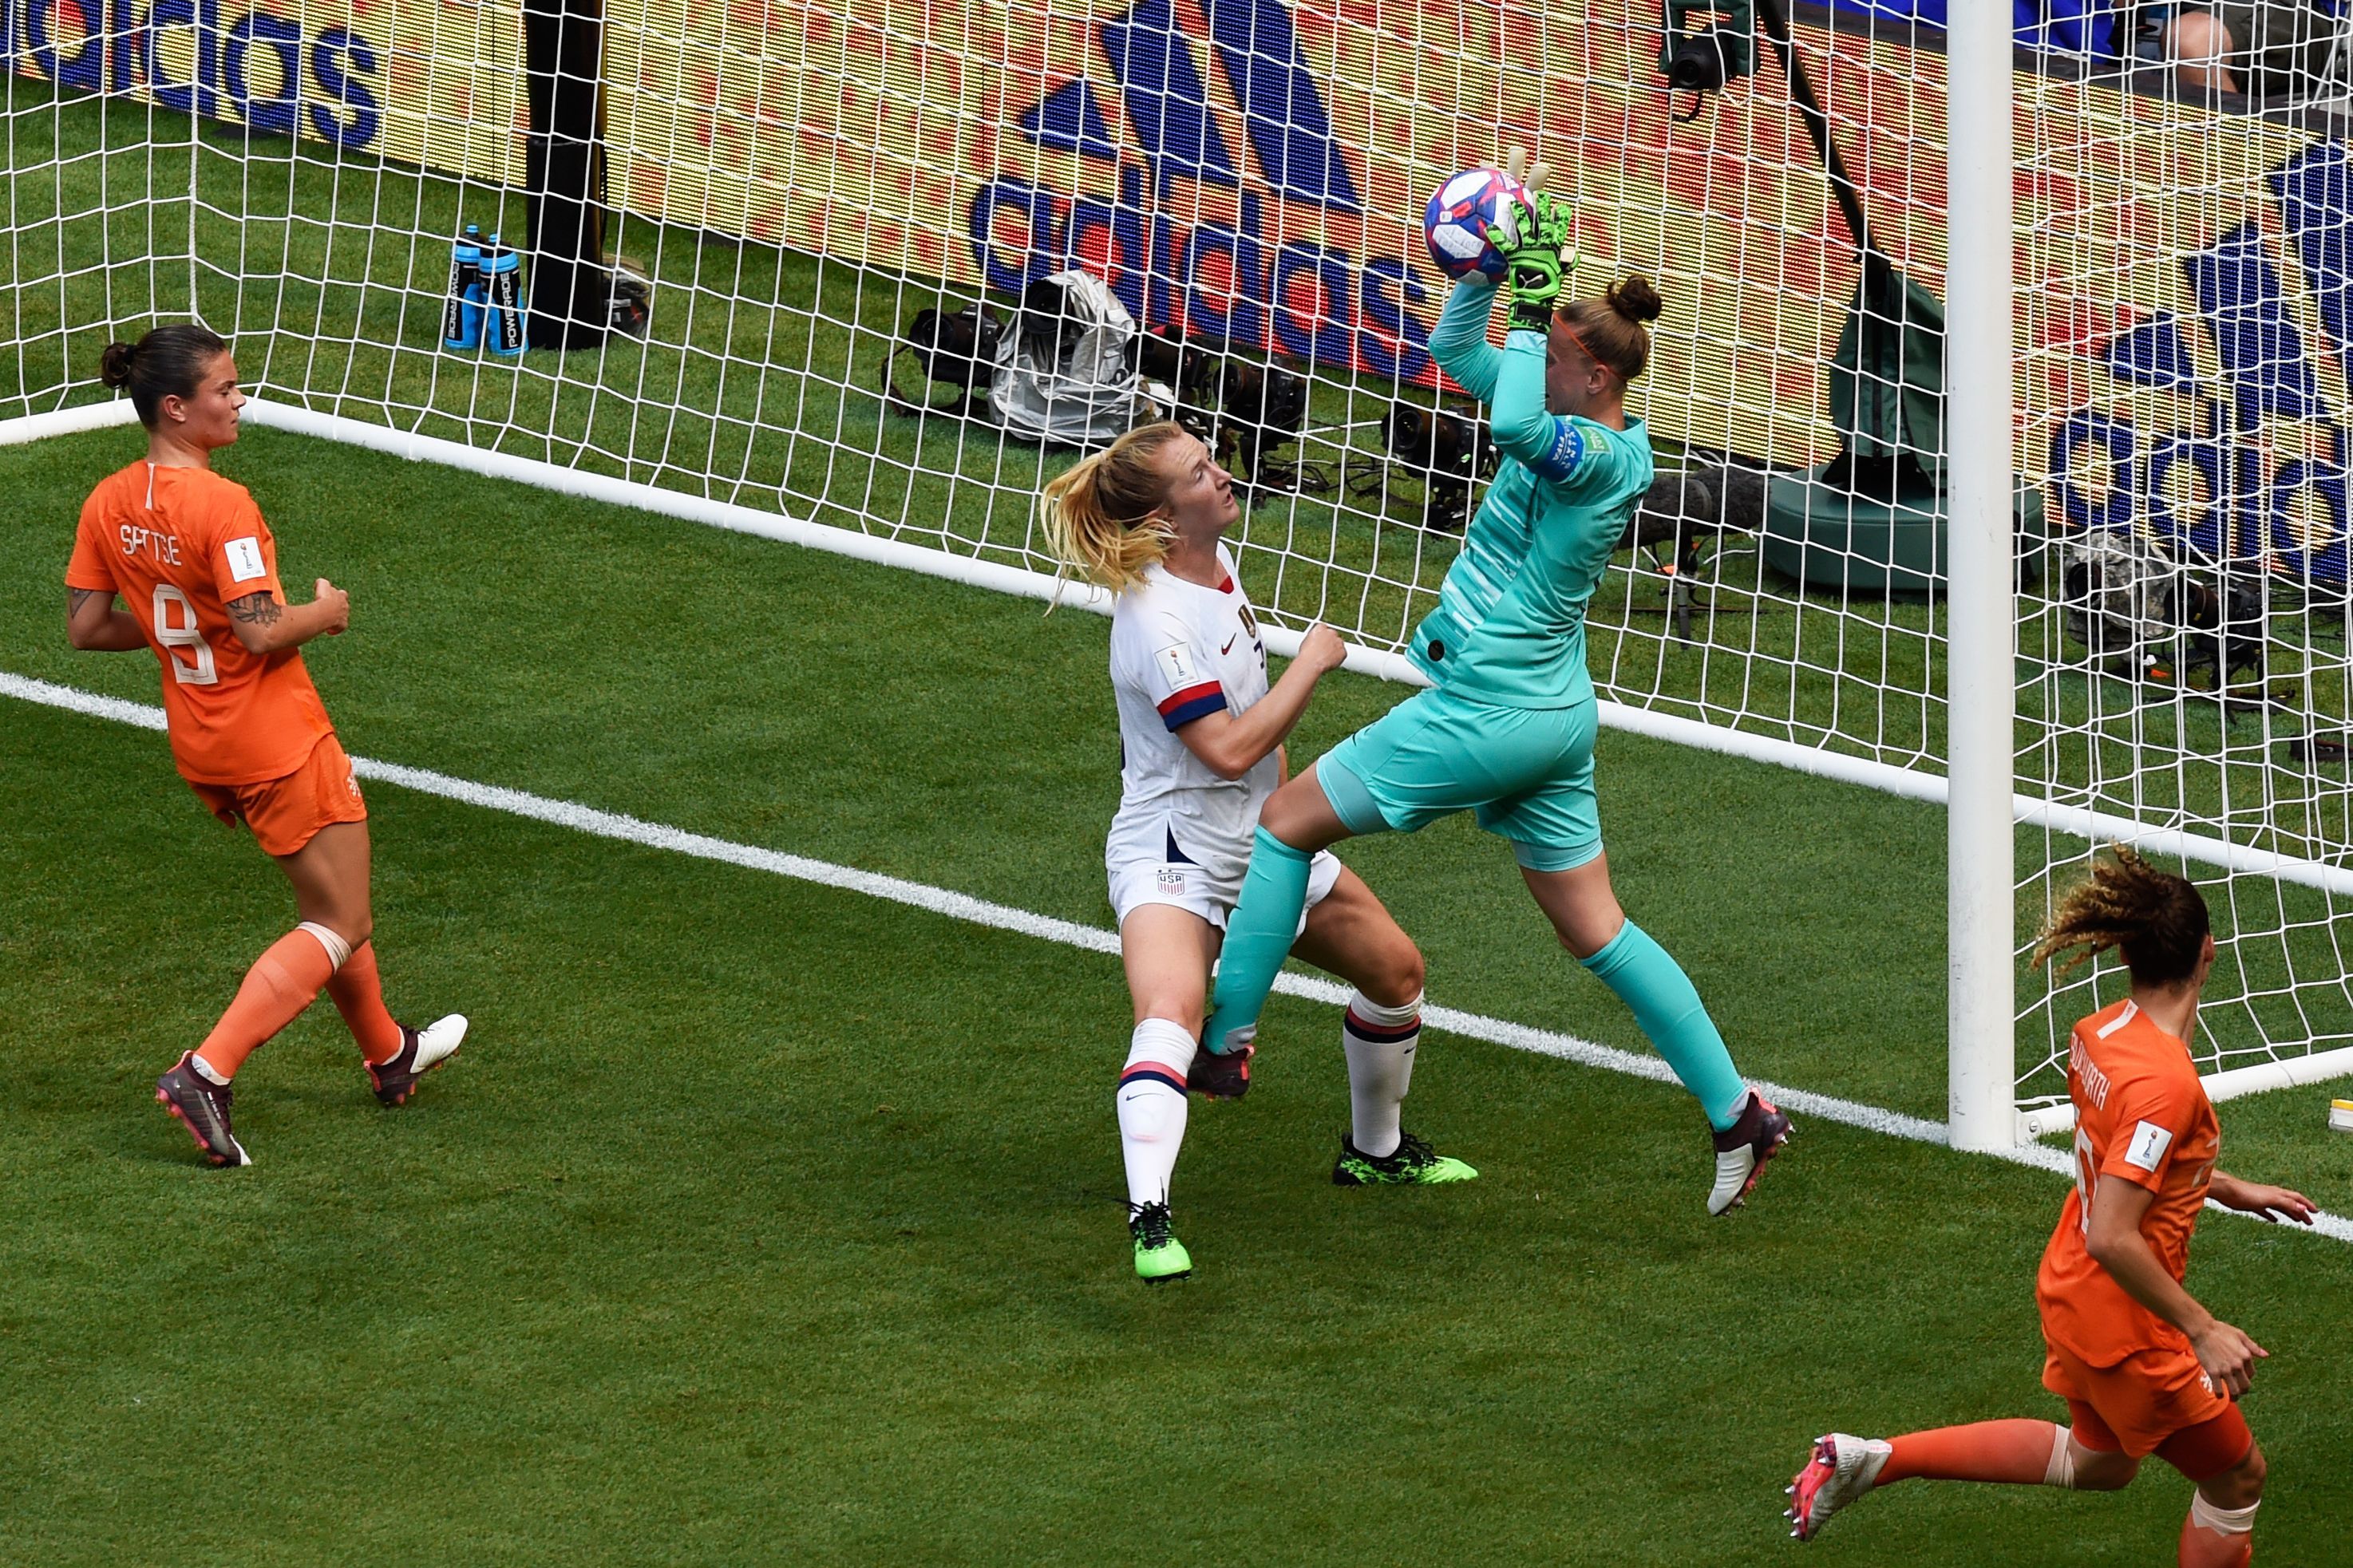 Netherlands' goalkeeper Sari van Veenendaal gets to the ball before United States' midfielder Sam Mewis the ball during the France 2019 Womens World Cup football final match.